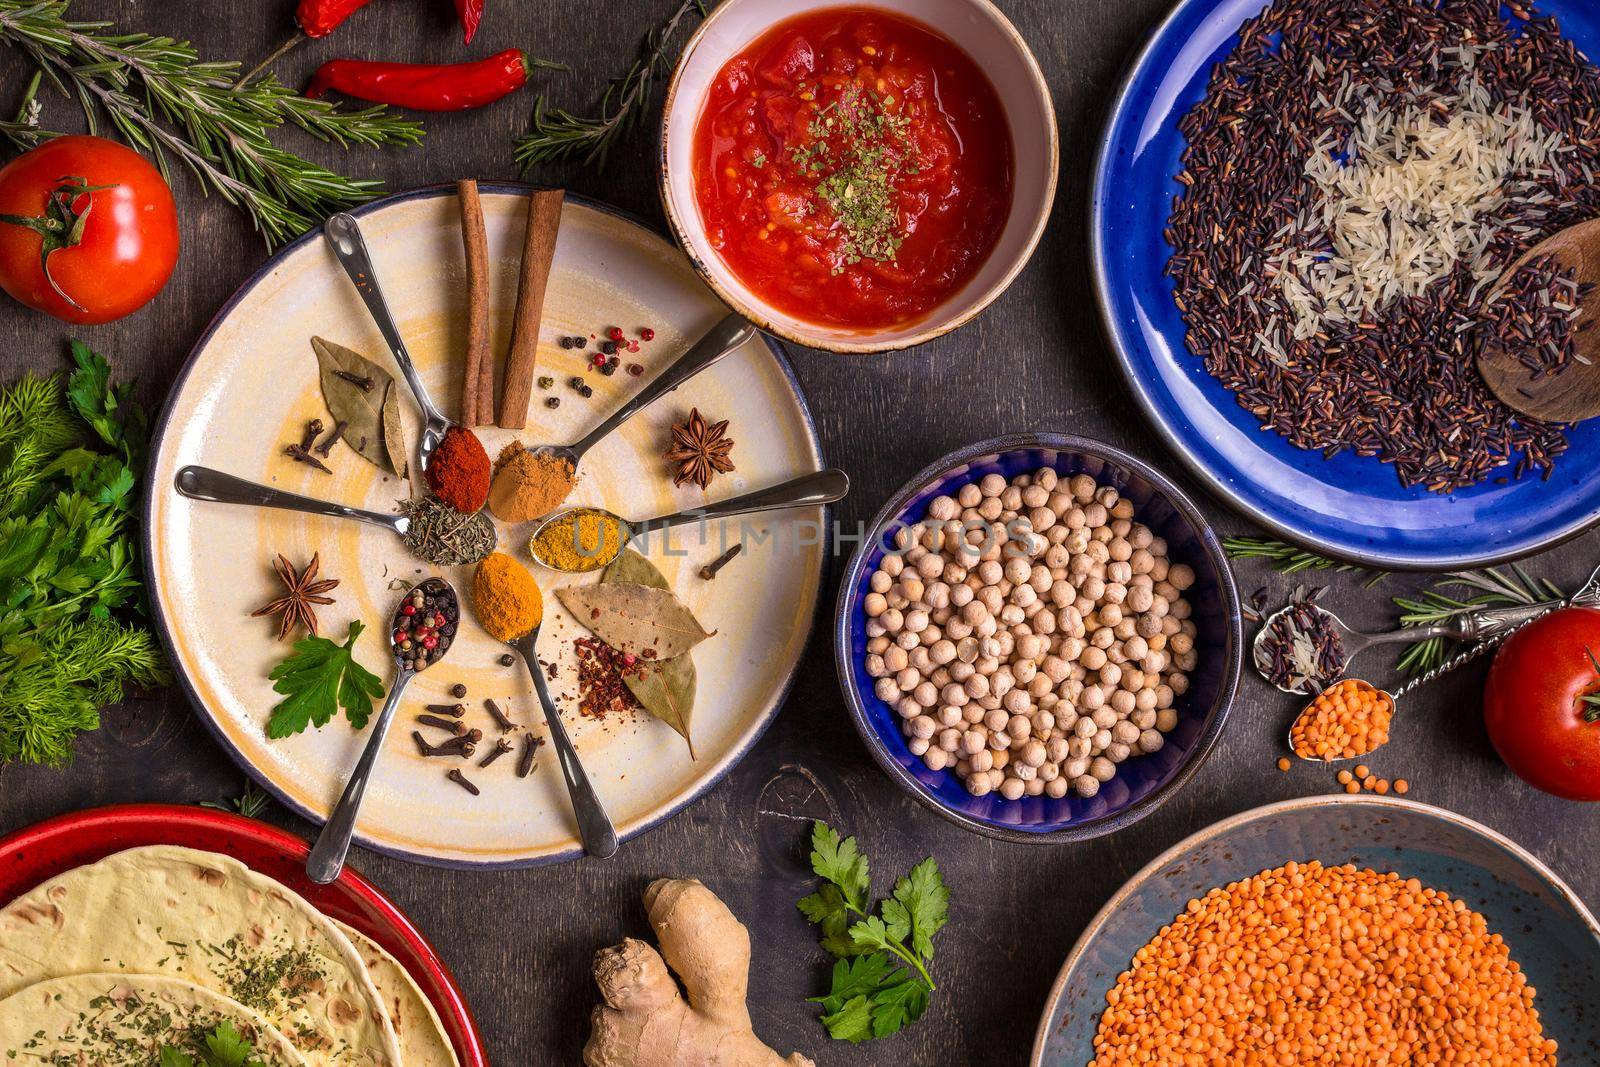 Assorted spices, herbs, chick-pea, lentil, basmati and wild rice mix, tomato chutney and pita on colorful plates. Top view. Spices and different food. Indian/ayurvedic food...